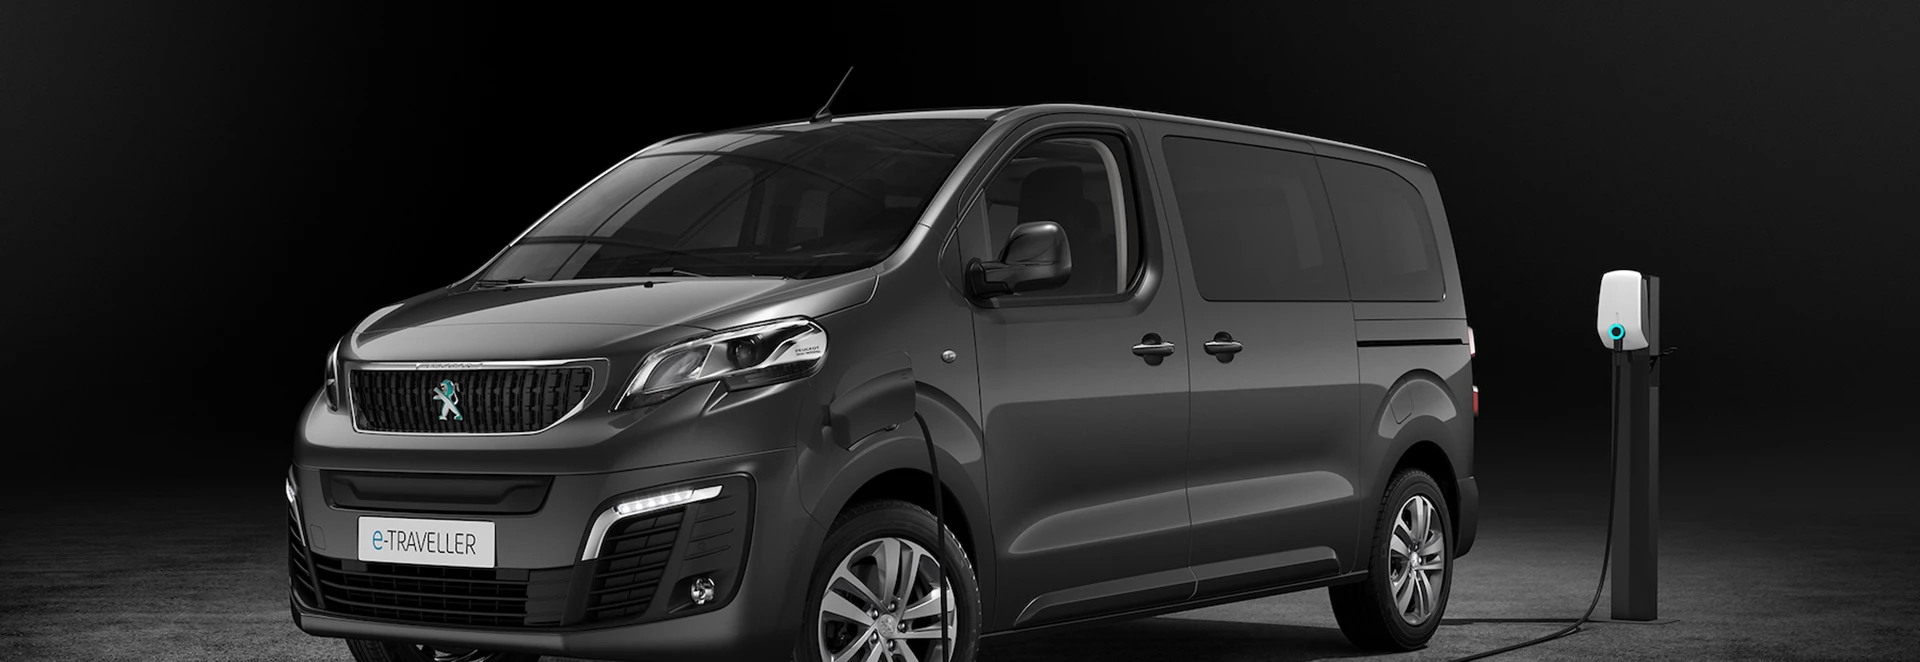 New Peugeot e-Traveller electric MPV unveiled 